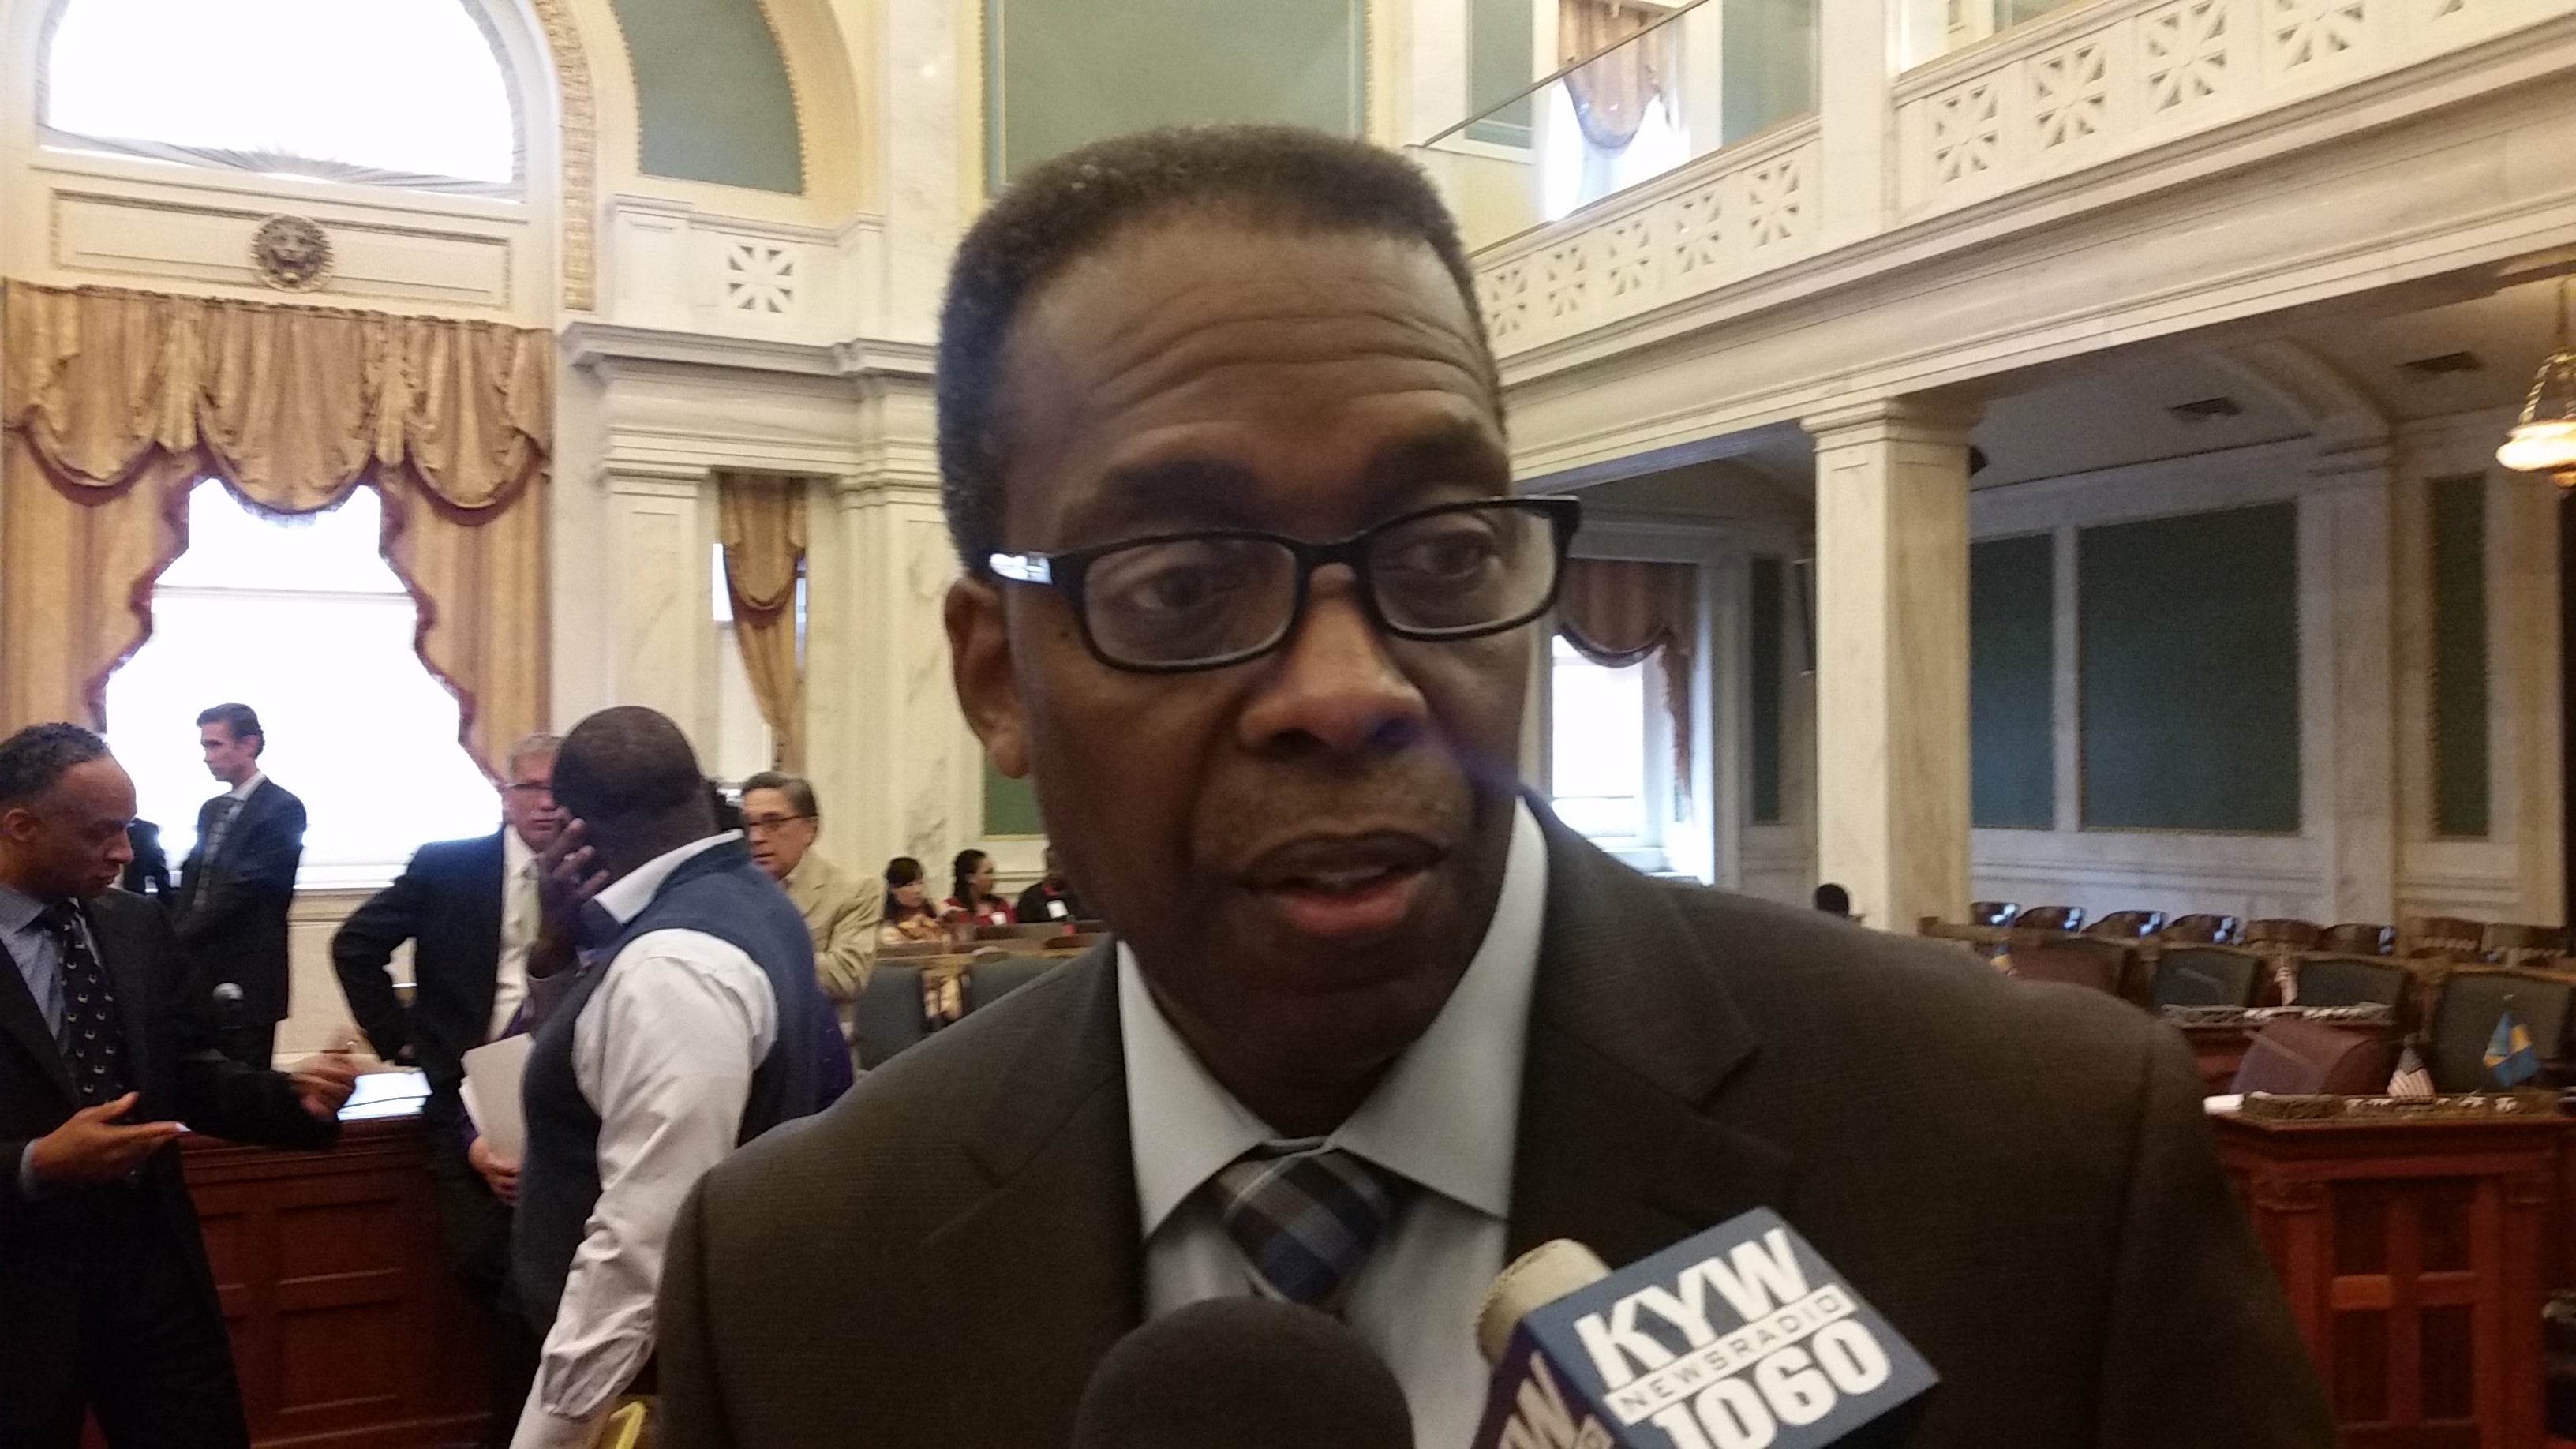  There's no guarantee the Philadelphia School District will get an additional $100 million in new, recurring funding from the city, says Council President Darrell Clarke. (Tom MacDonald/WHYY) said. 